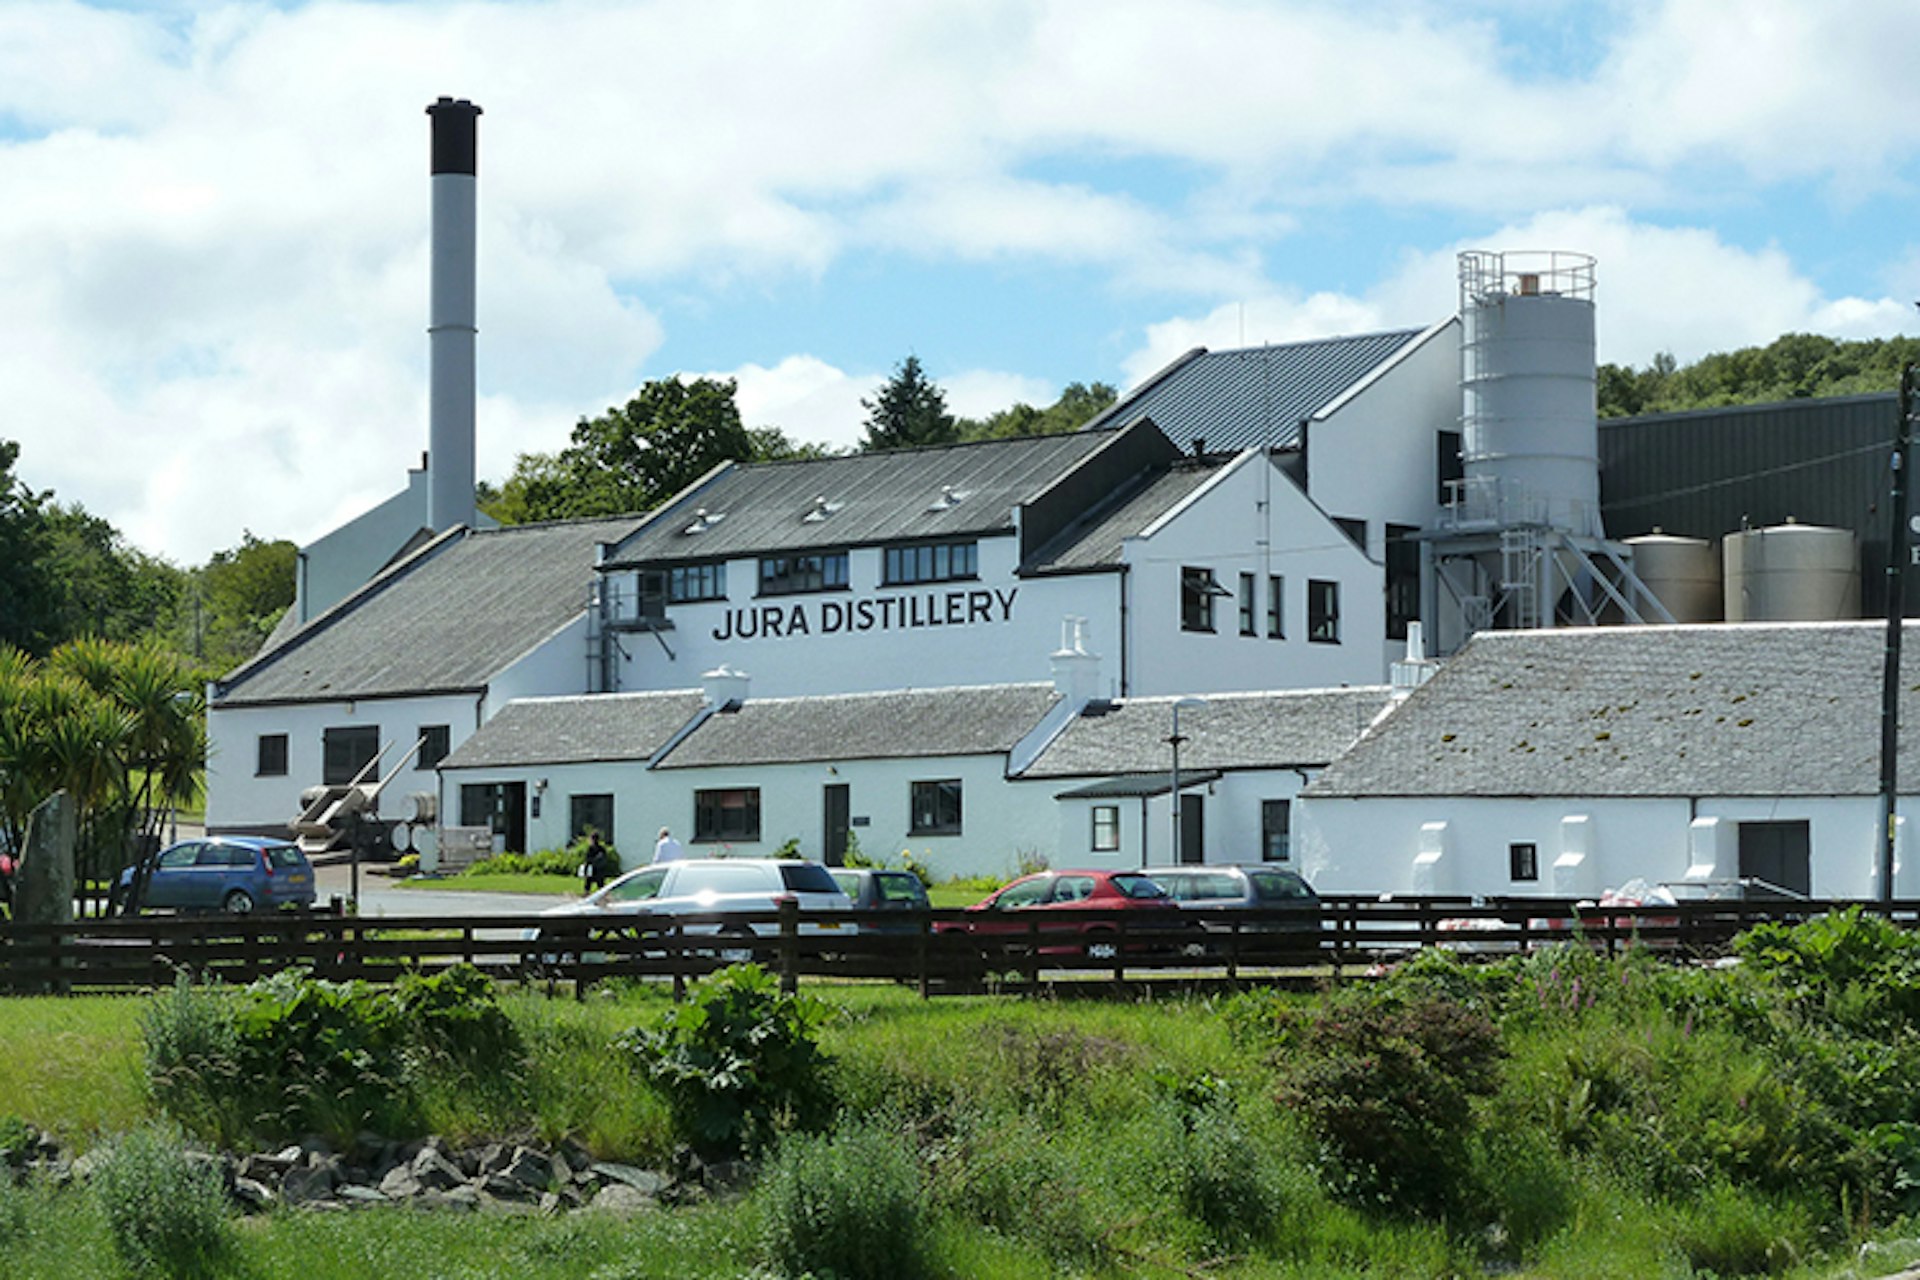 Jura's distillery produces some of Scotland's finest single malts. Image by Nige Brown / CC BY 2.0